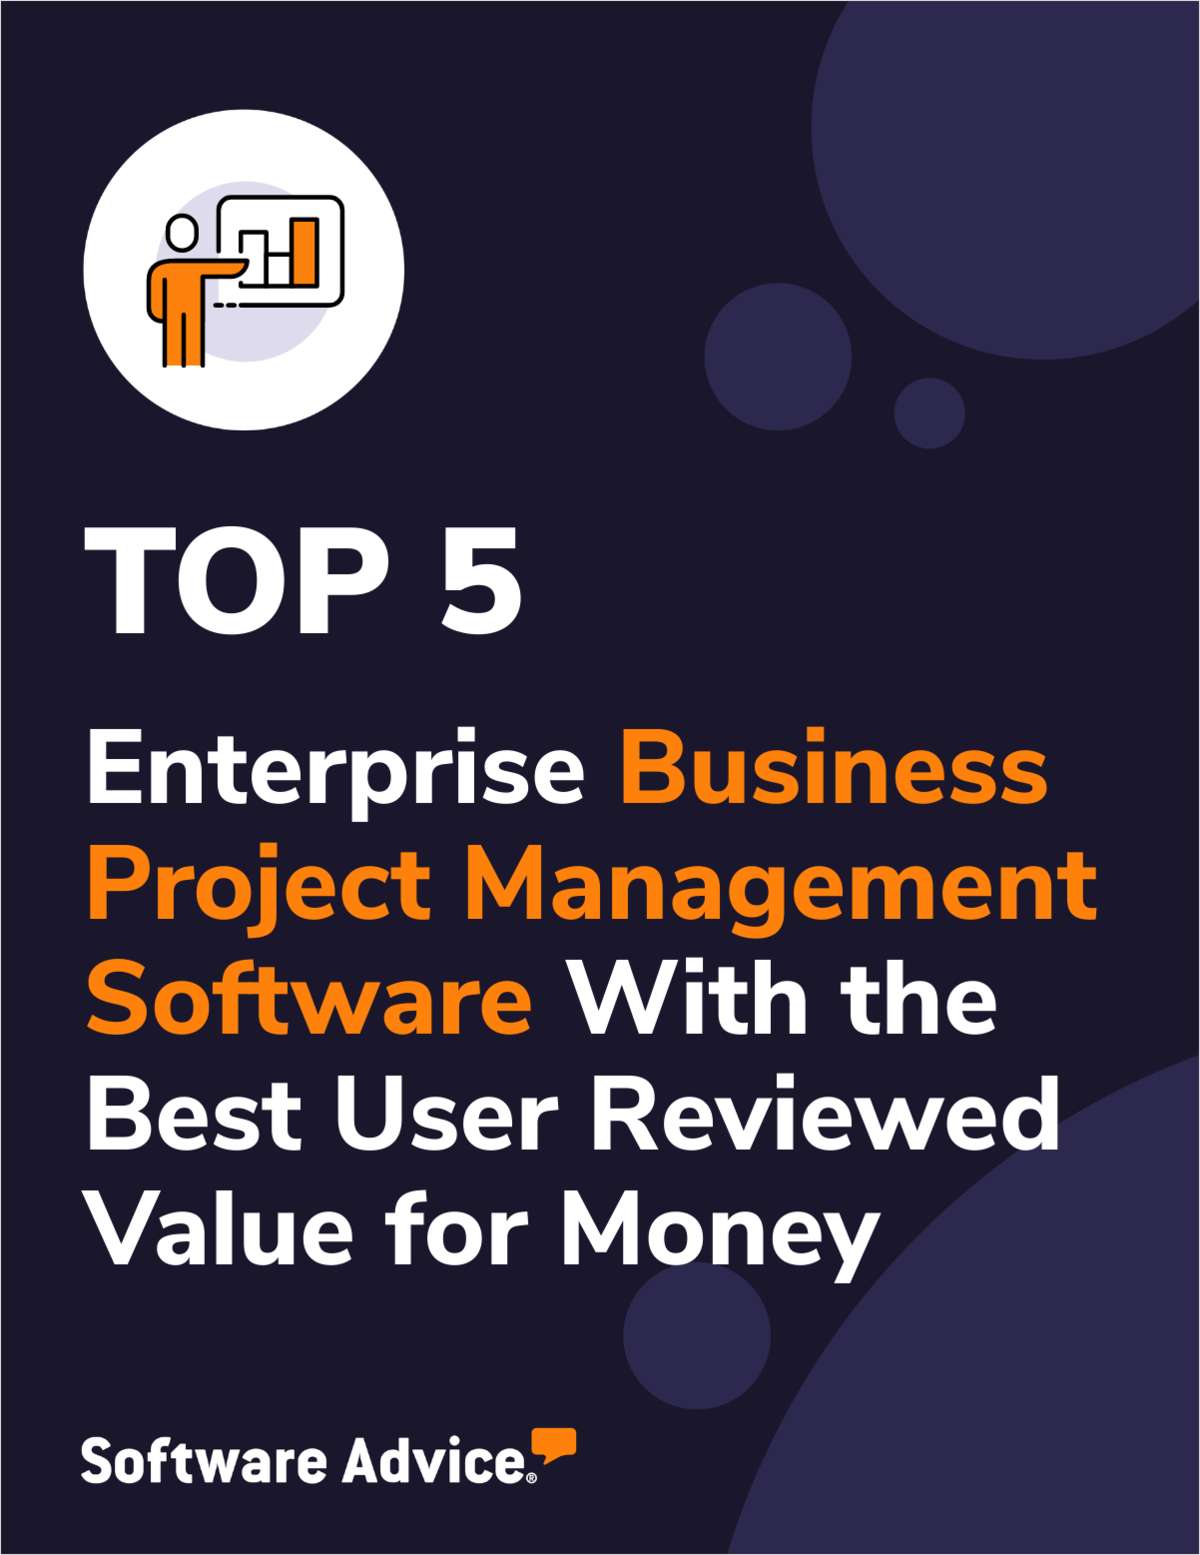 Top 5 Enterprise Business Project Management Software With the Best User Reviewed Value for Money